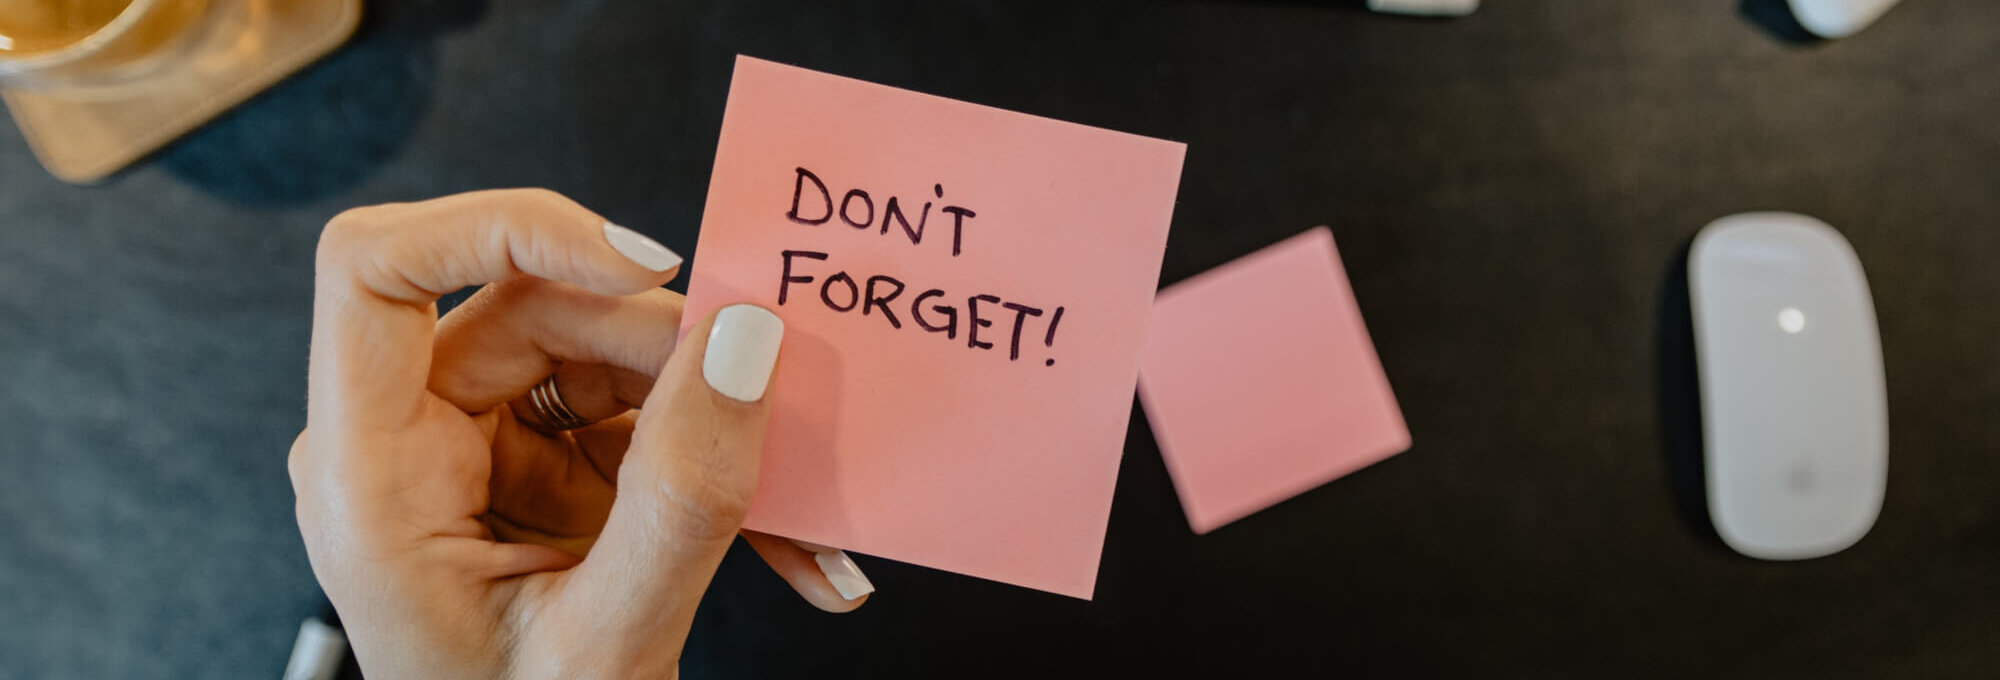 A woman holding a sticky note reminder that says "don't forget!"